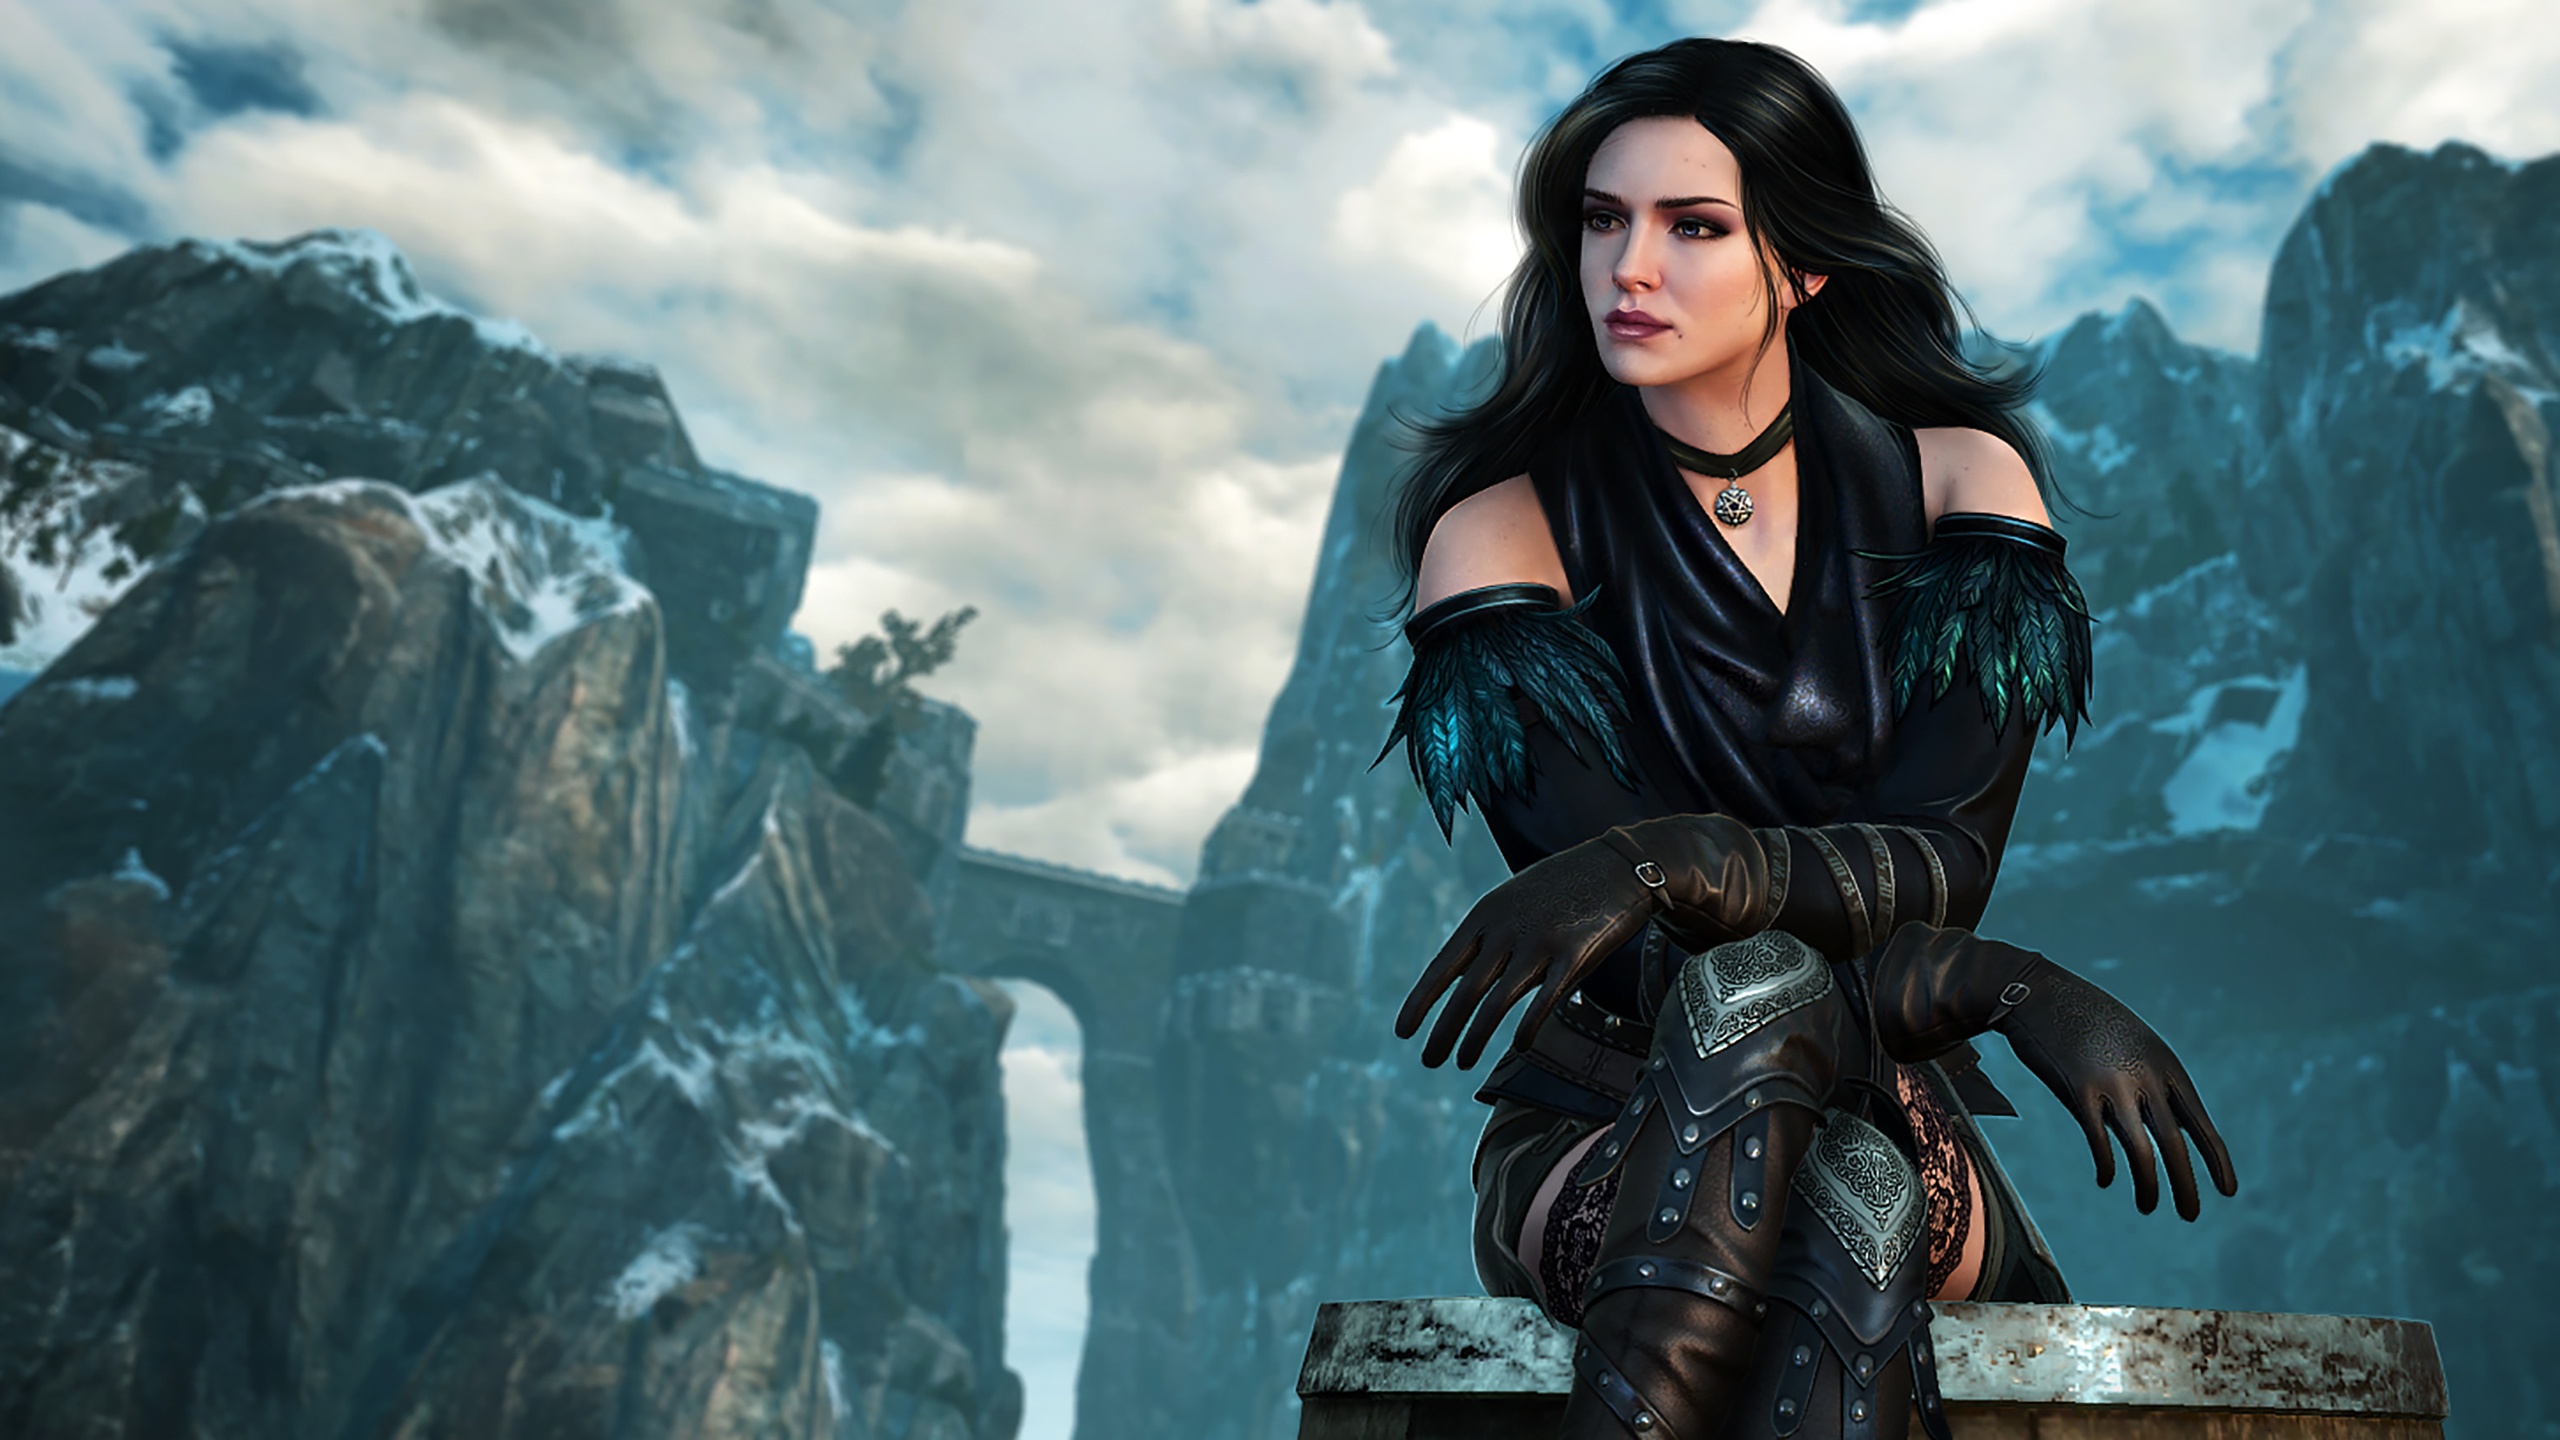 Yennefer of vengerberg the witcher 3 voiced standalone follower se фото 9